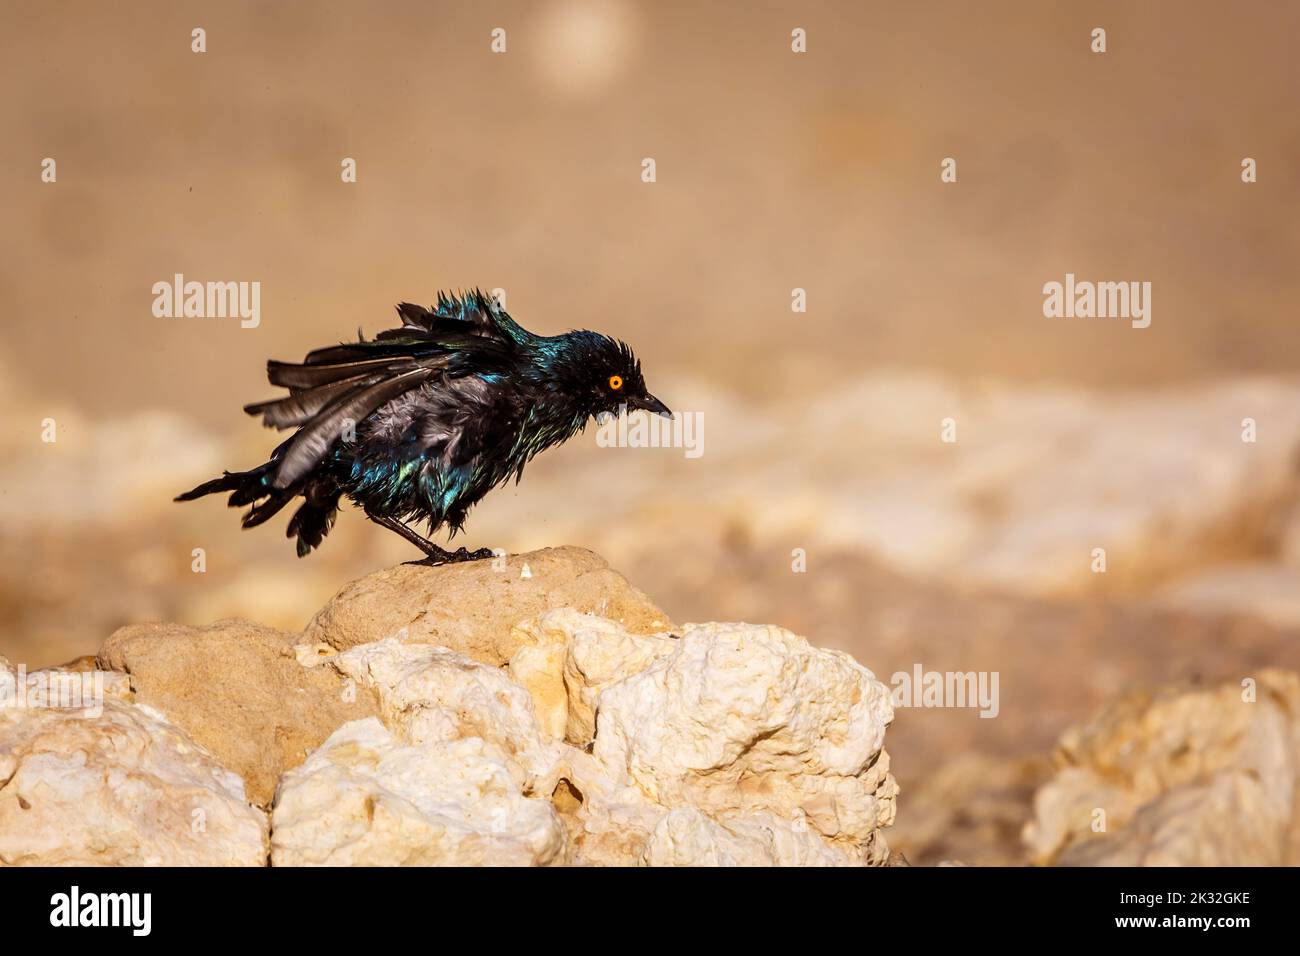 Cape Glossy Starling shaking after bathing in Kgalagadi transfrontier park, South Africa; Specie Lamprotornis nitens family of Sturnidae Stock Photo